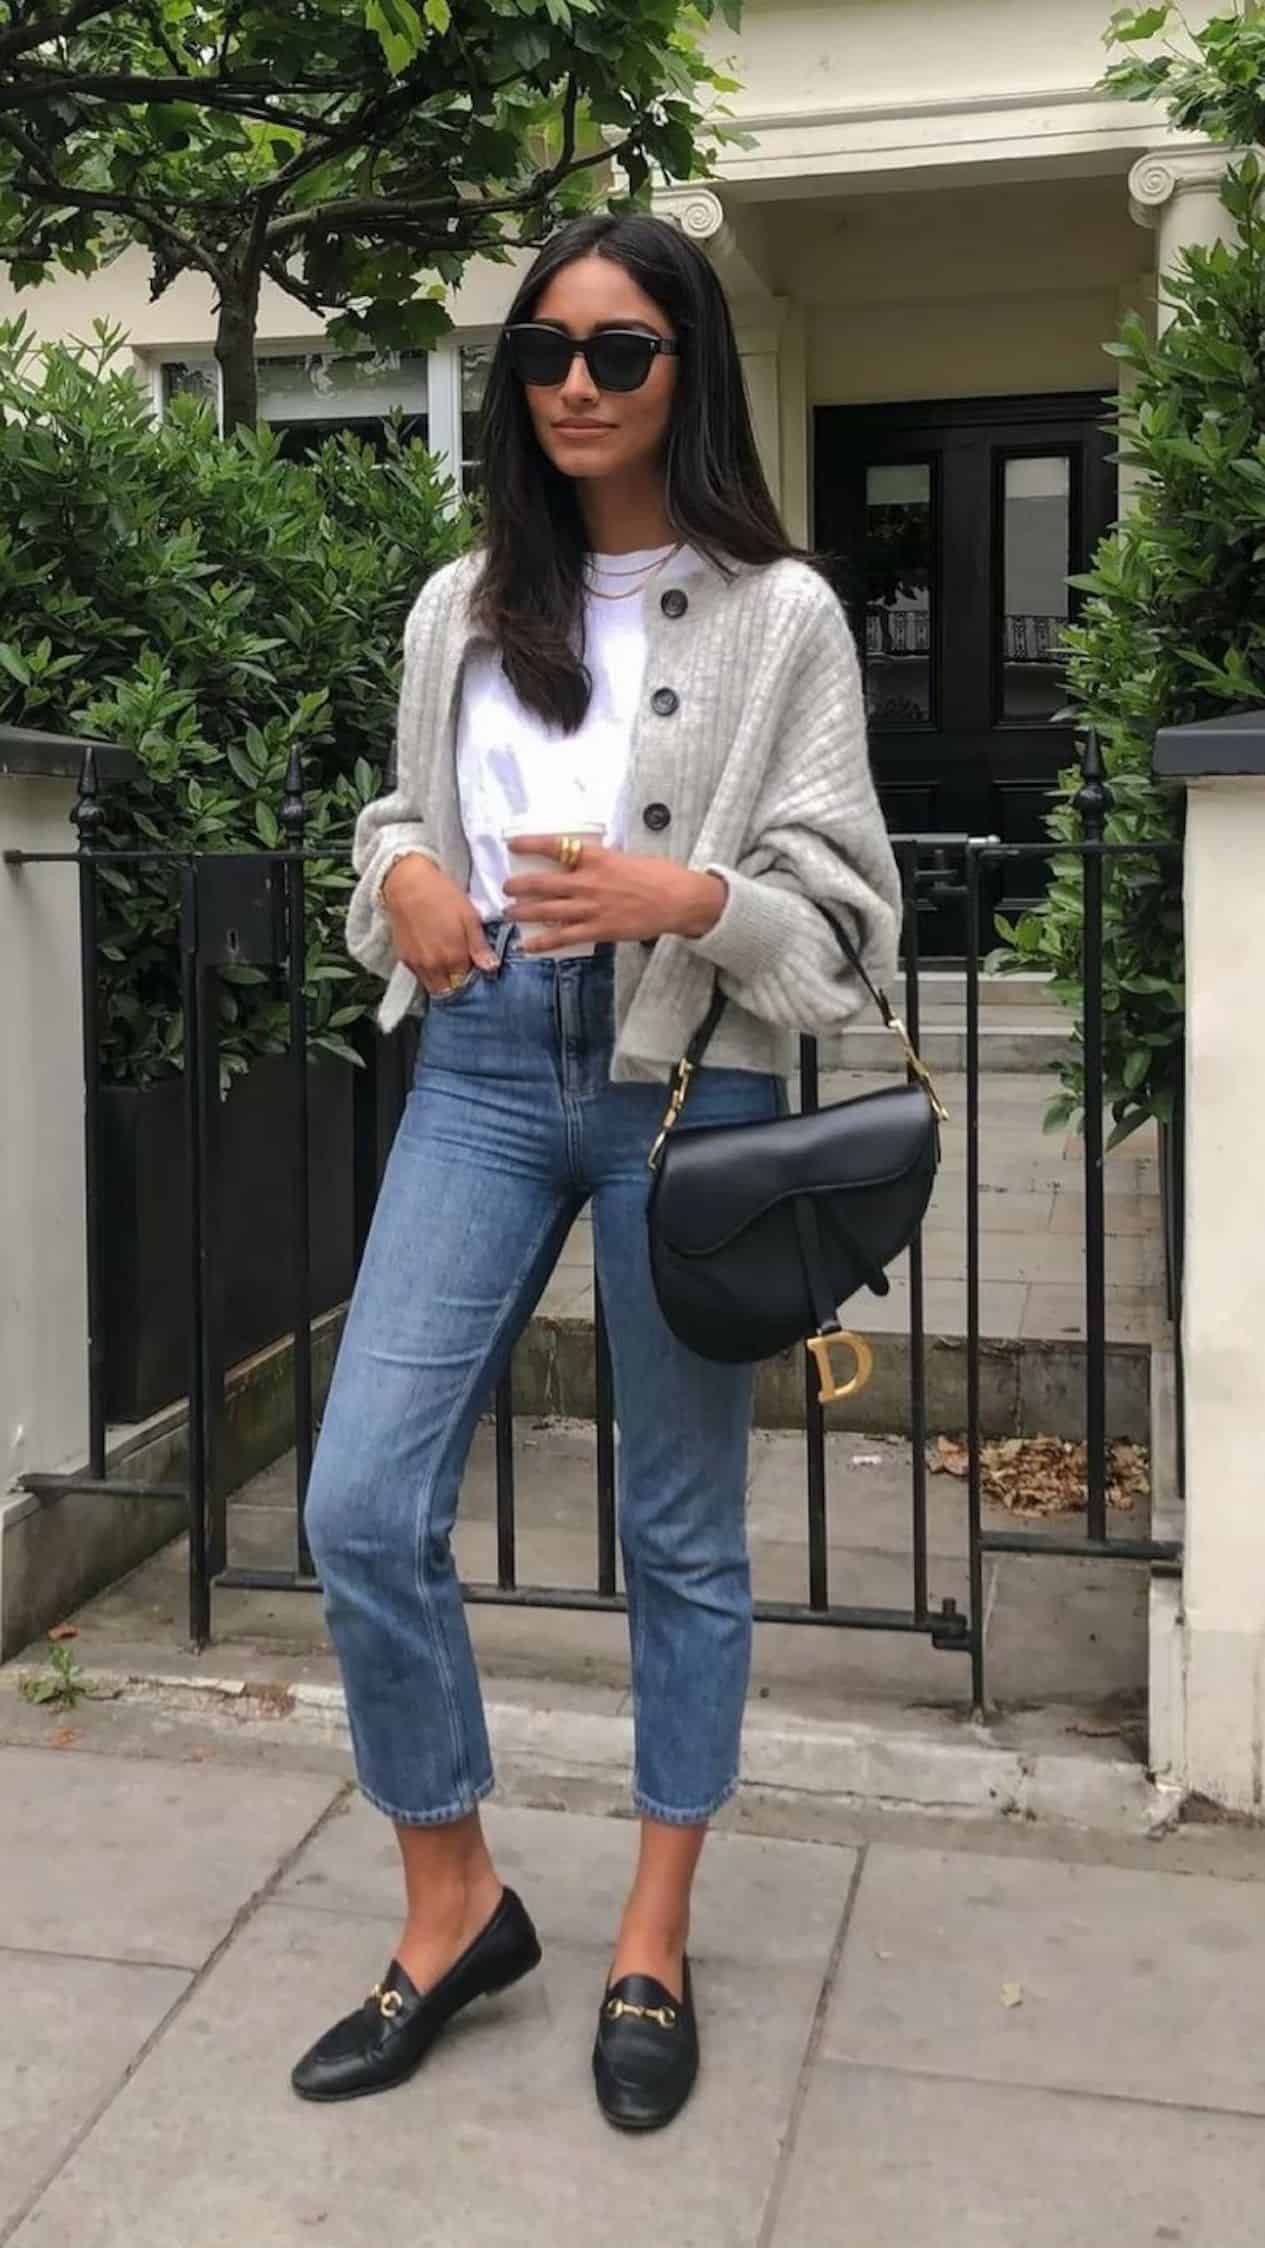 image of a woman with brown hair standing on the sidewalk wearing jeans, a grey cardigan, and Gucci loafers